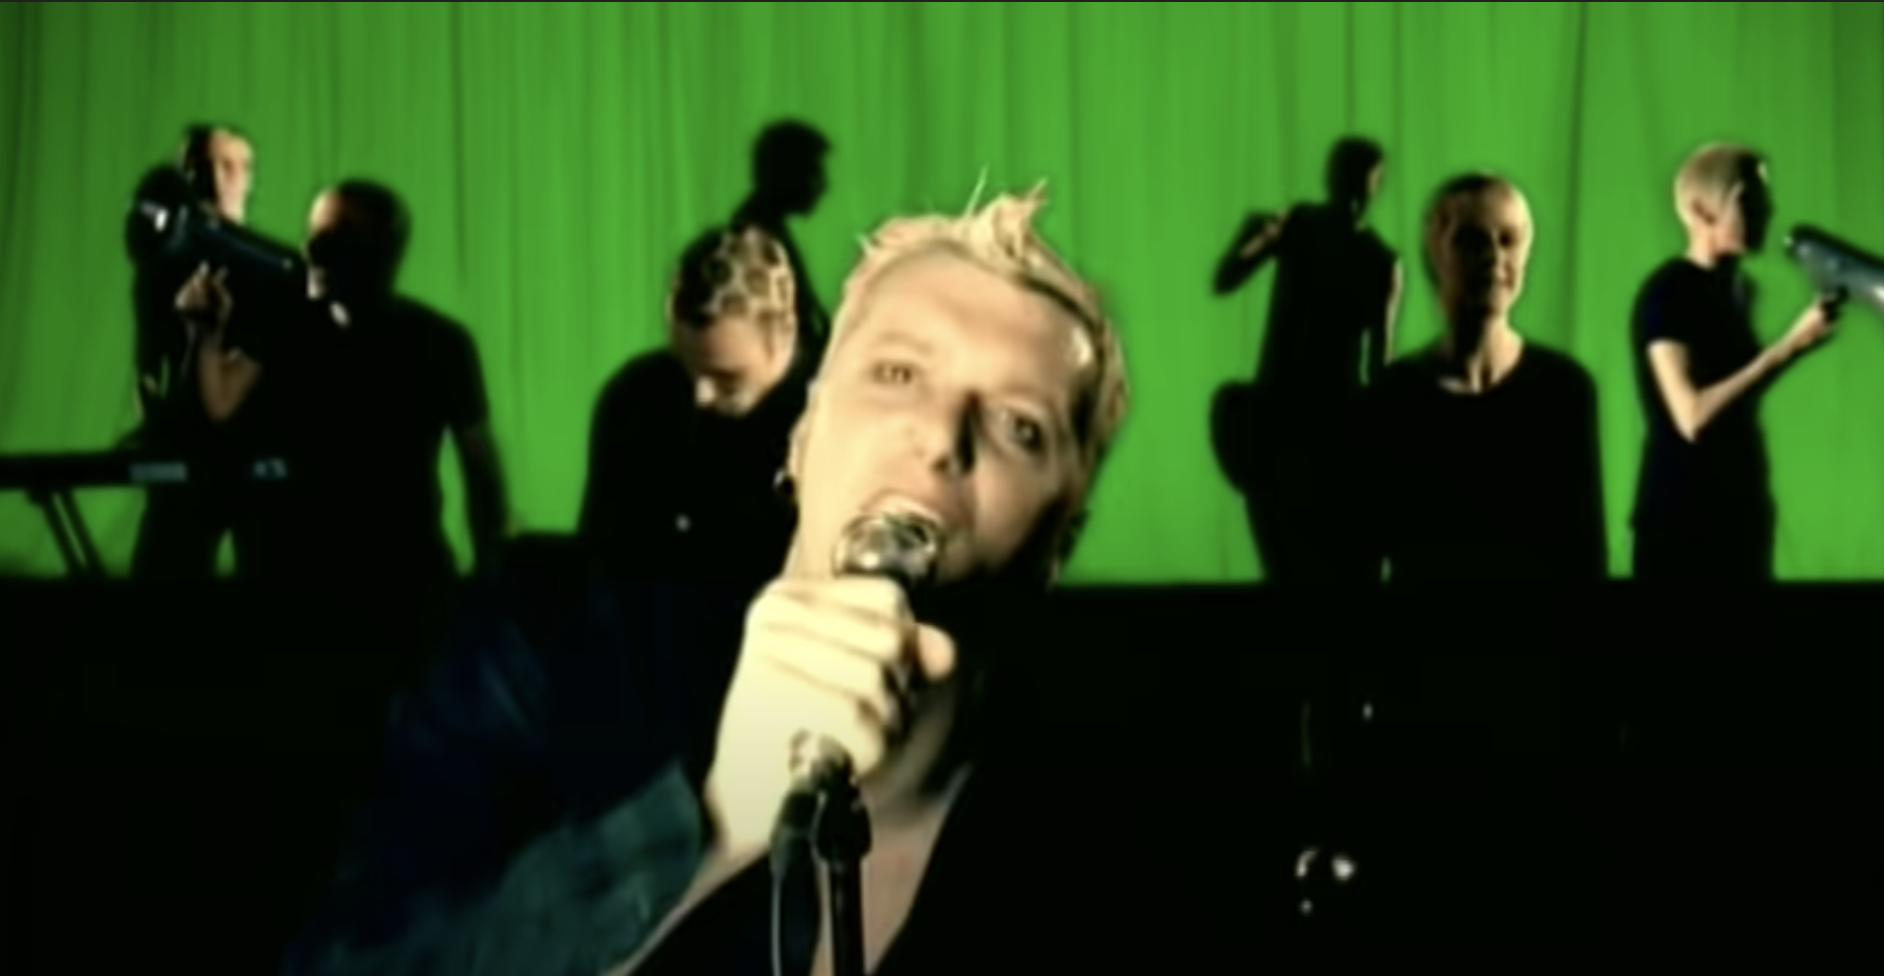 The band performing Tubthumping in the video